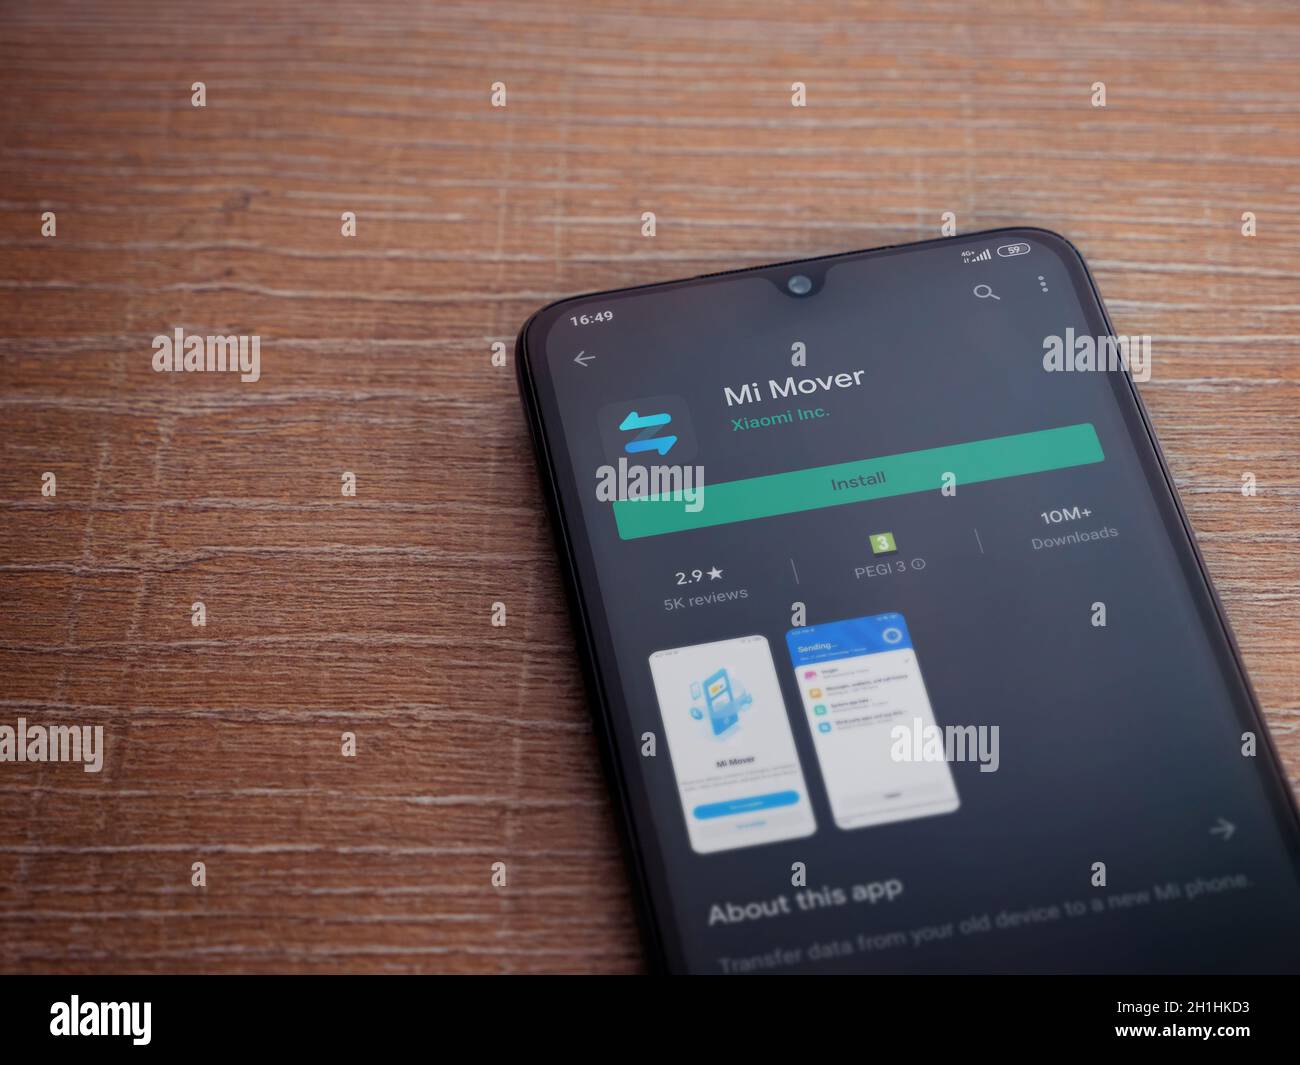 Lod, Israel - July 8, 2020: Mi Mover app play store page on the display of  a black mobile smartphone on wooden background. Top view flat lay with copy  Stock Photo - Alamy